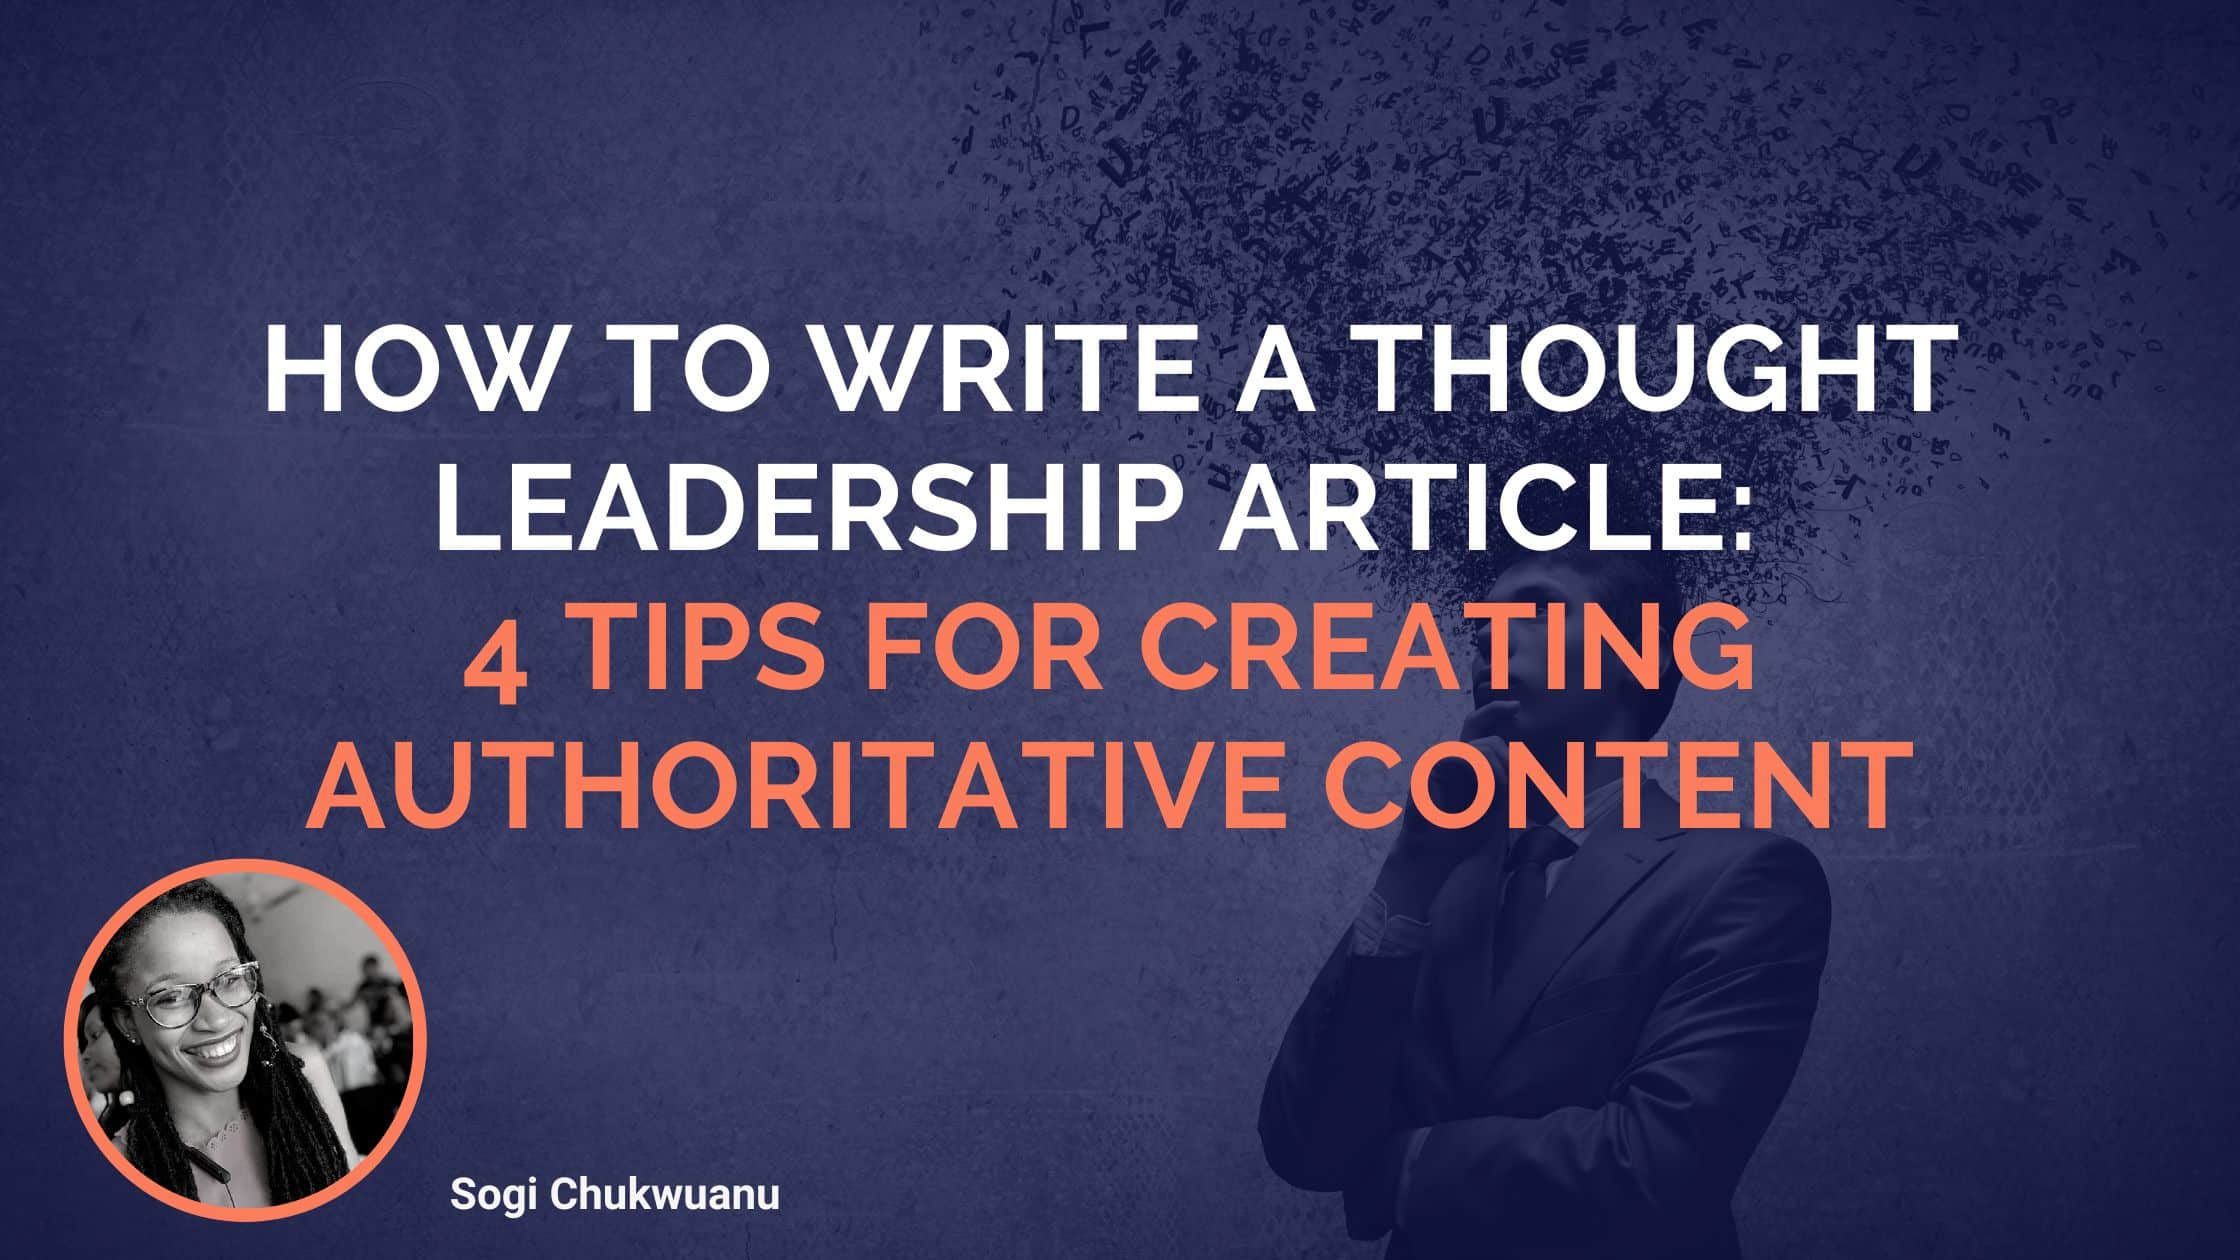 How To Write A Thought Leadership Article: 4 Tips For Creating Authoritative Content